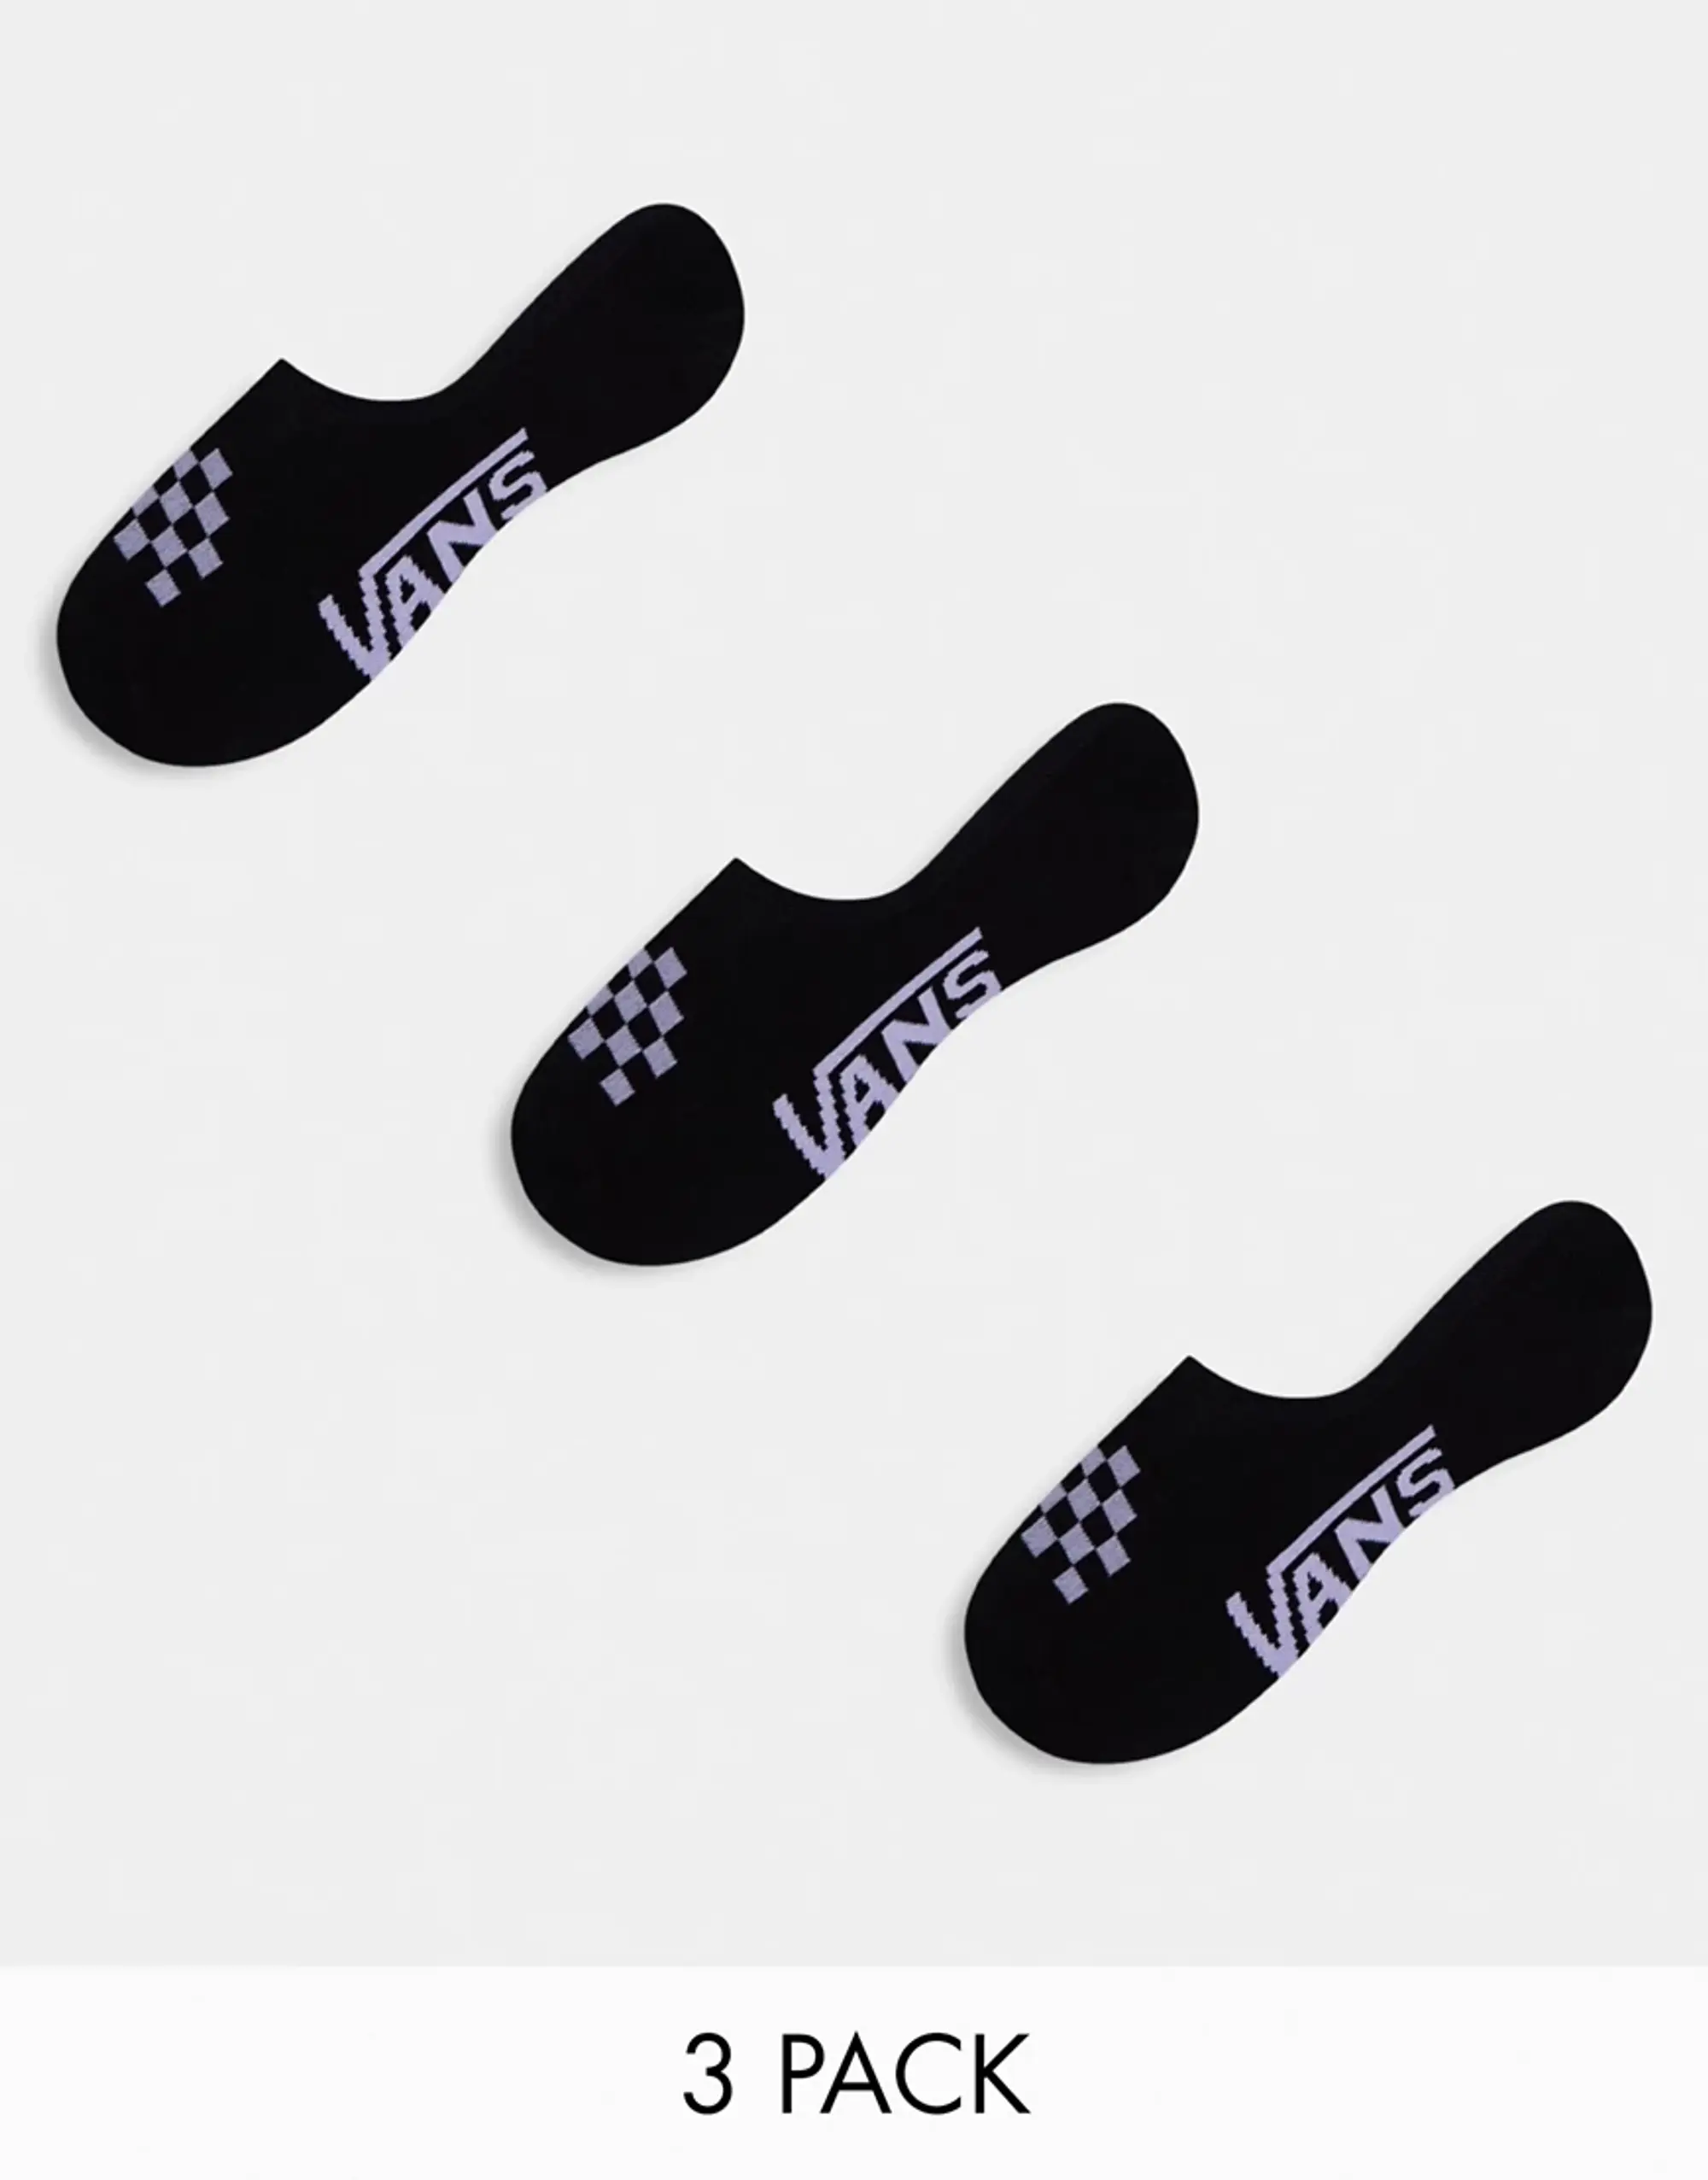 Vans Classic Canoodle 3 Pack Socks In Black And Lilac-Multi